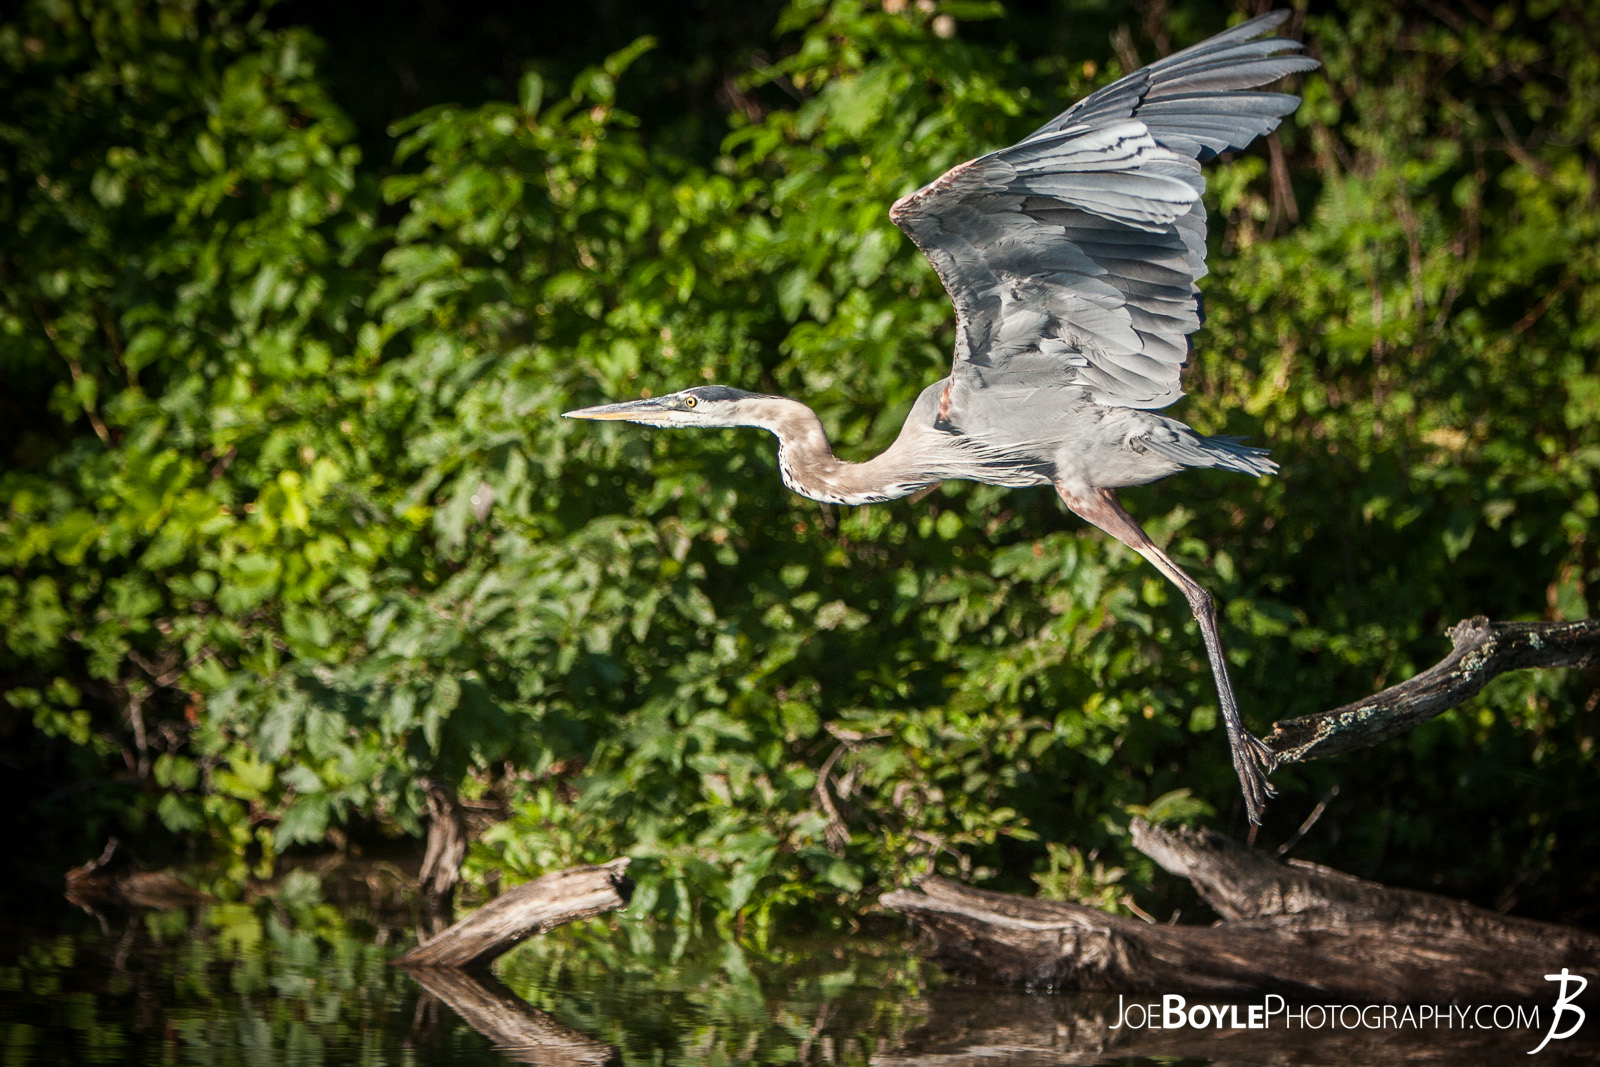  While on a trip up to Big Bass Lake, Michigan spending time with friends, fishing, having bonfires and what not, I was able to capture this Heron taking off and in flight! 